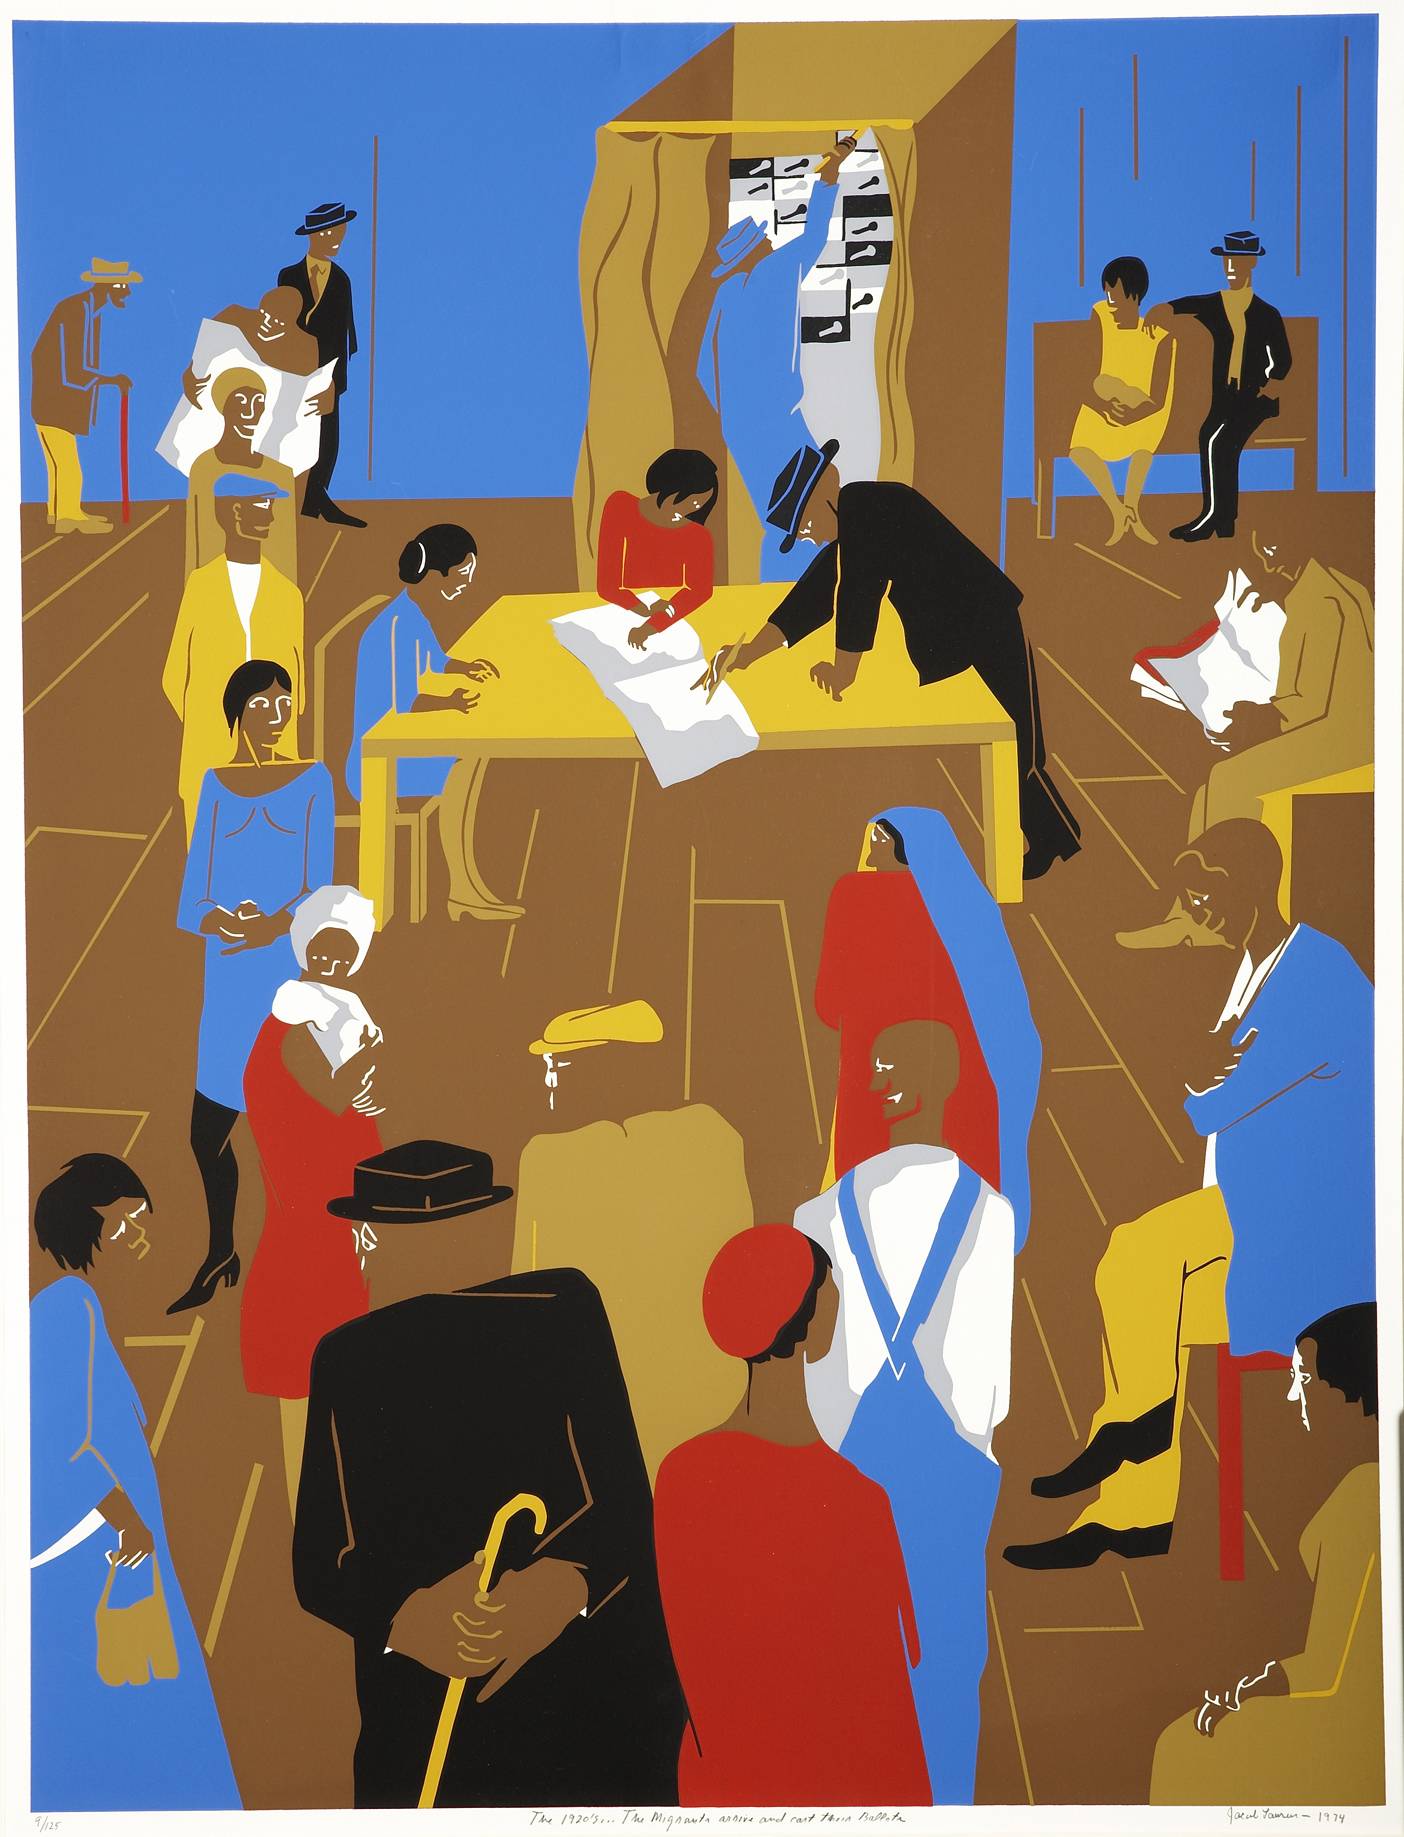 Screenprint of a scene with people surrounding a table